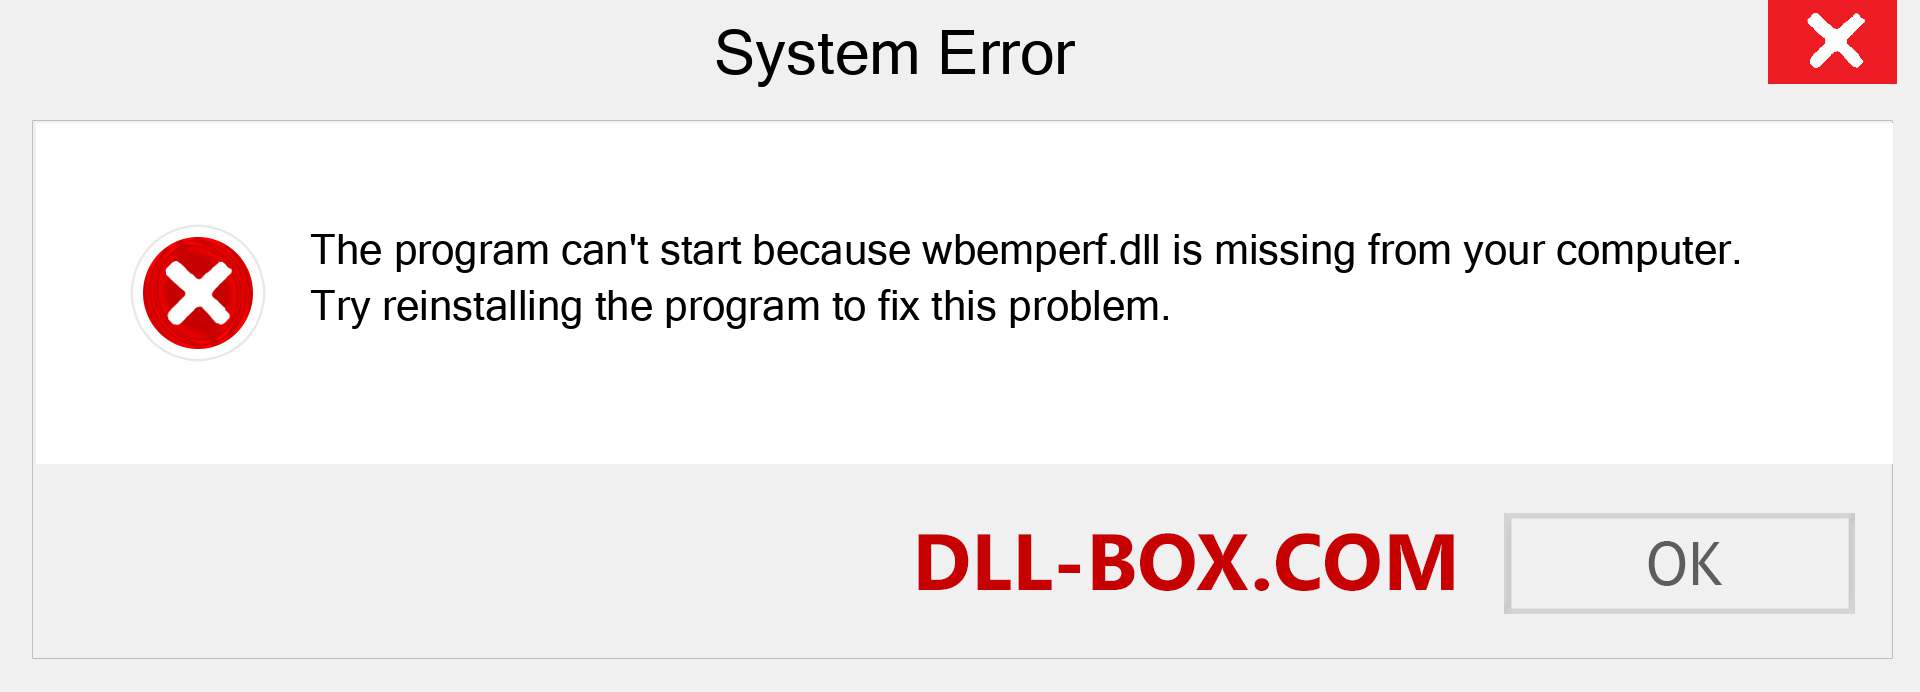  wbemperf.dll file is missing?. Download for Windows 7, 8, 10 - Fix  wbemperf dll Missing Error on Windows, photos, images